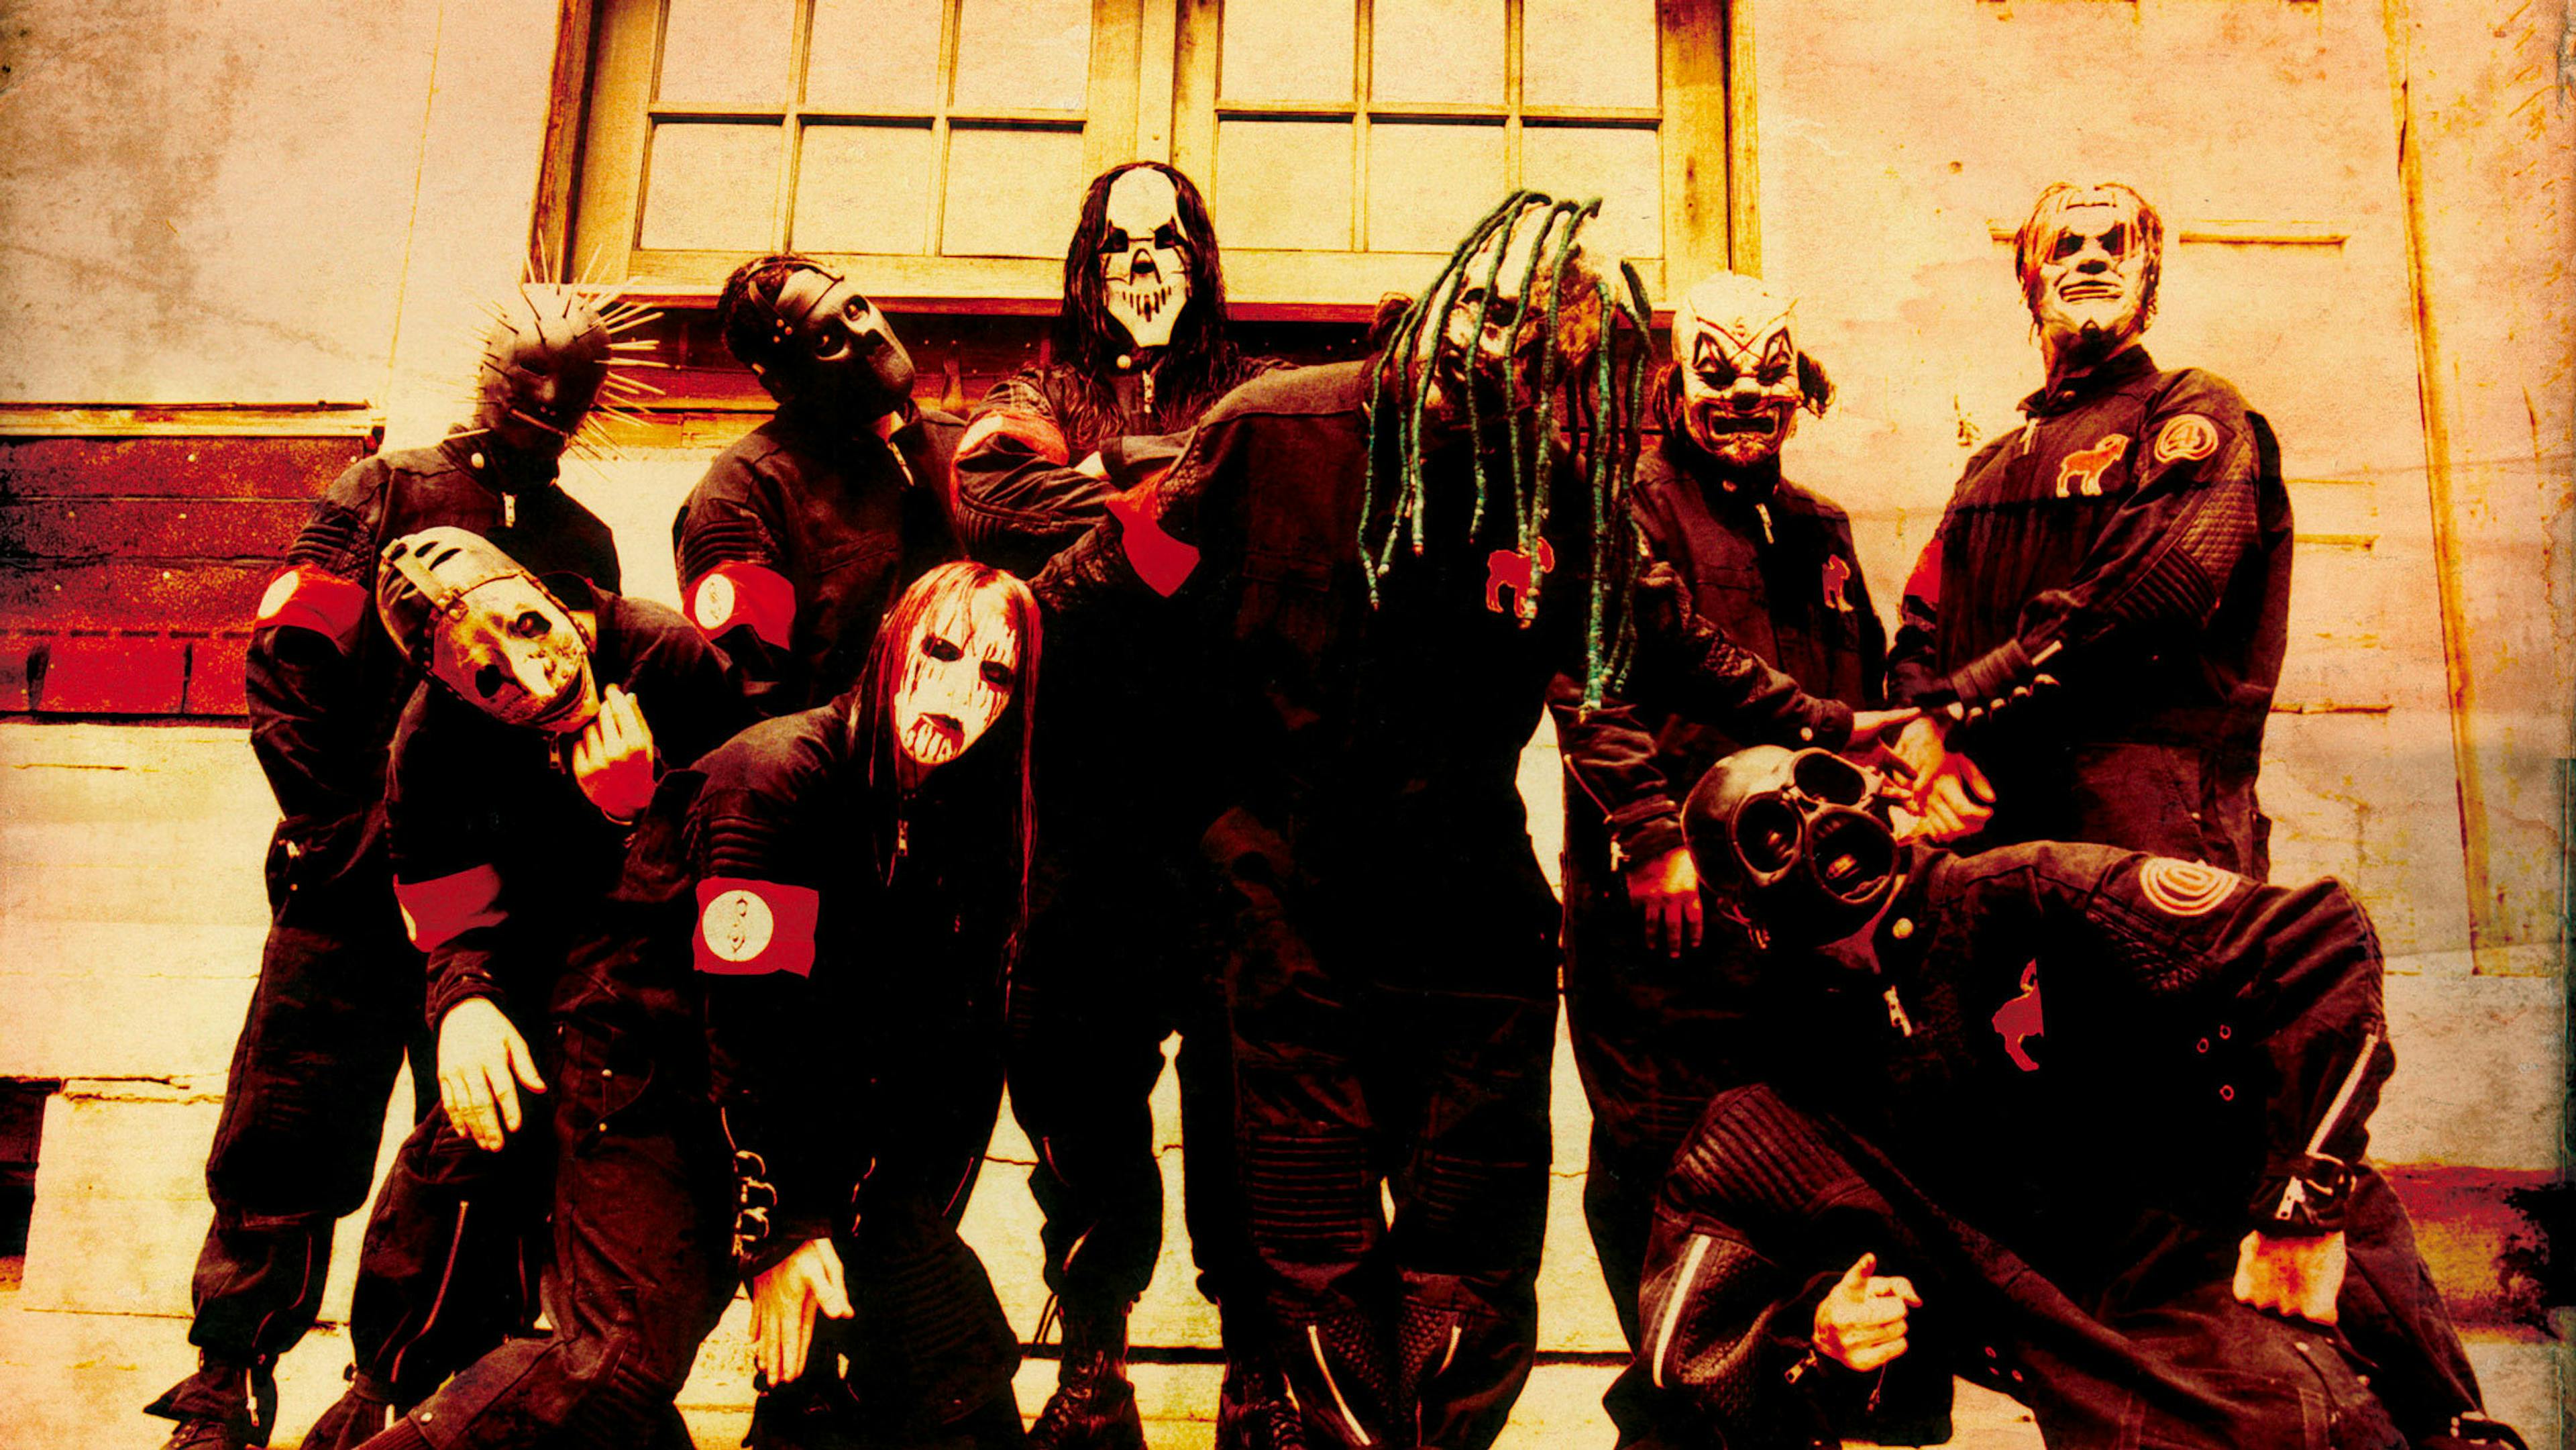 Slipknot: Every song on Iowa, ranked from worst to best